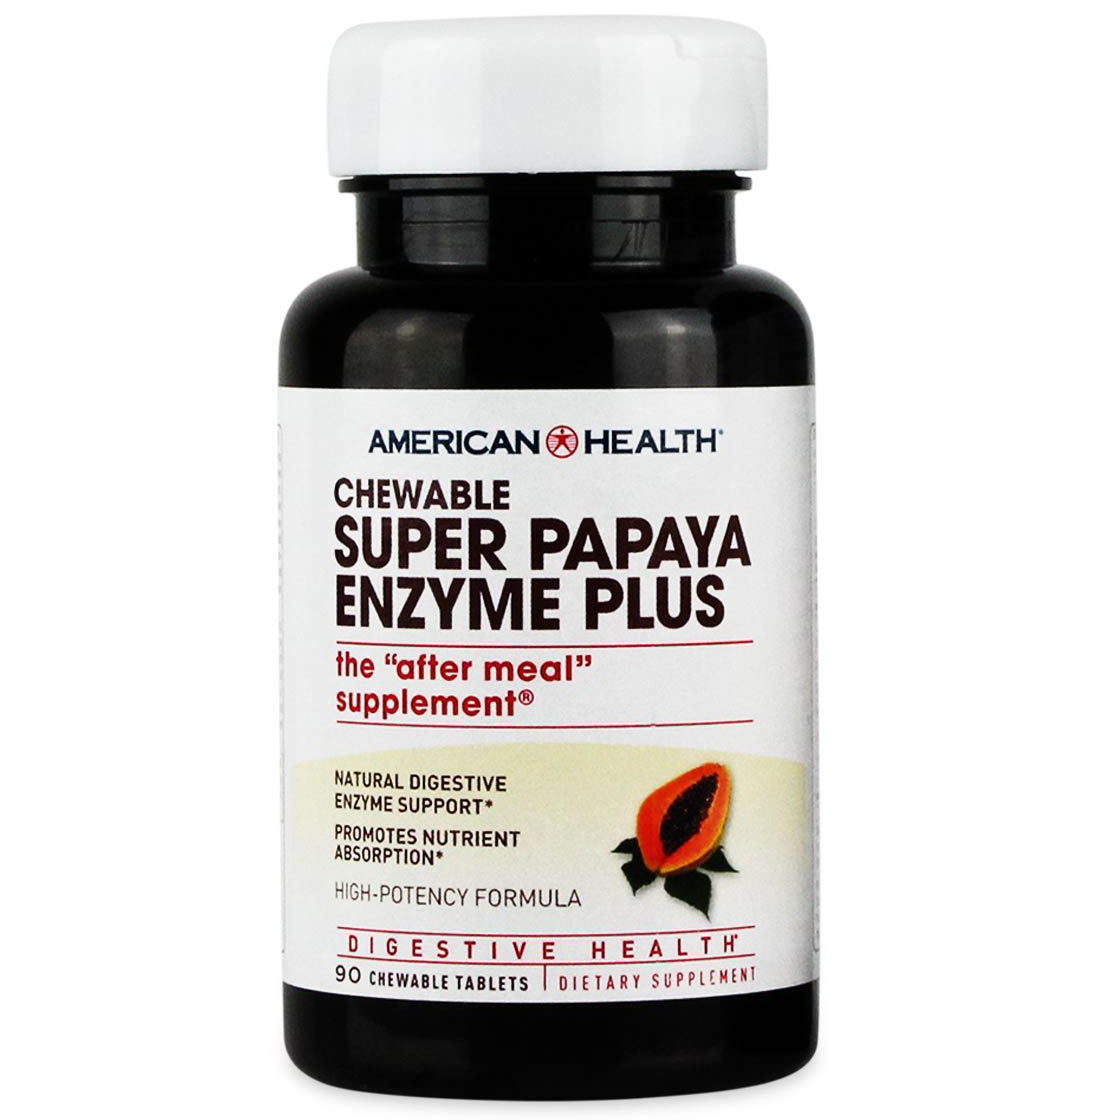 AMERICAN HEALTH - CHEWABLE SUPER PAPAYA ENZYME PLUS - (The After Meal Supplement) - 90 Tablets